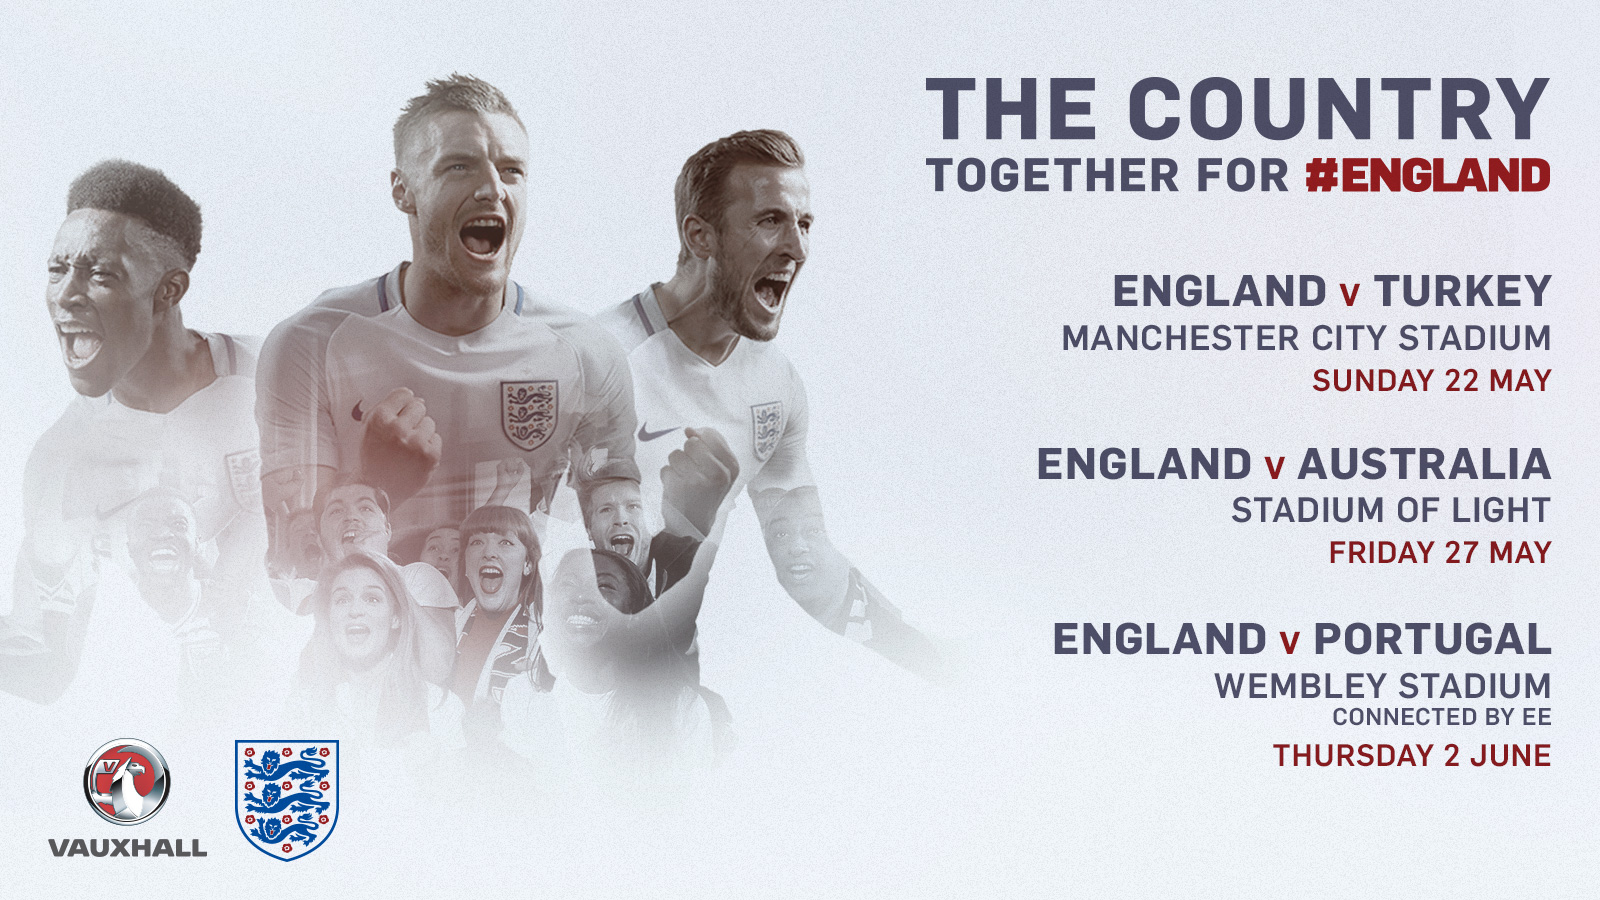 England will go on the road ahead of EURO 2016